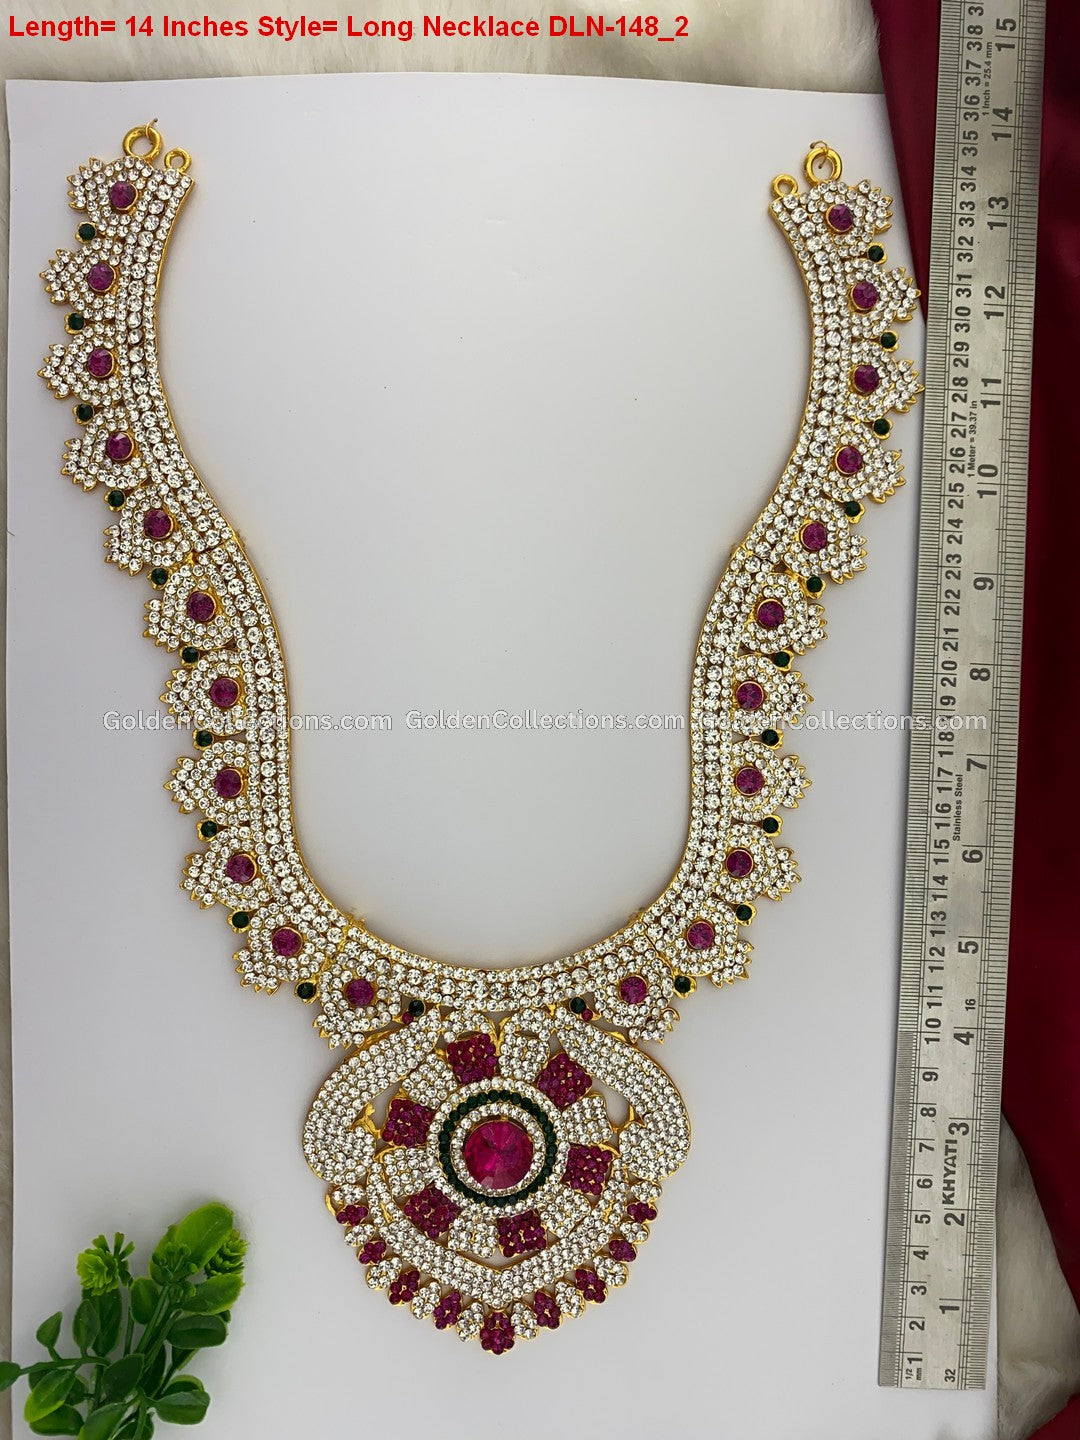 Jhumka Long Harams: Adornments with Elegant Earrings DLN-148 2